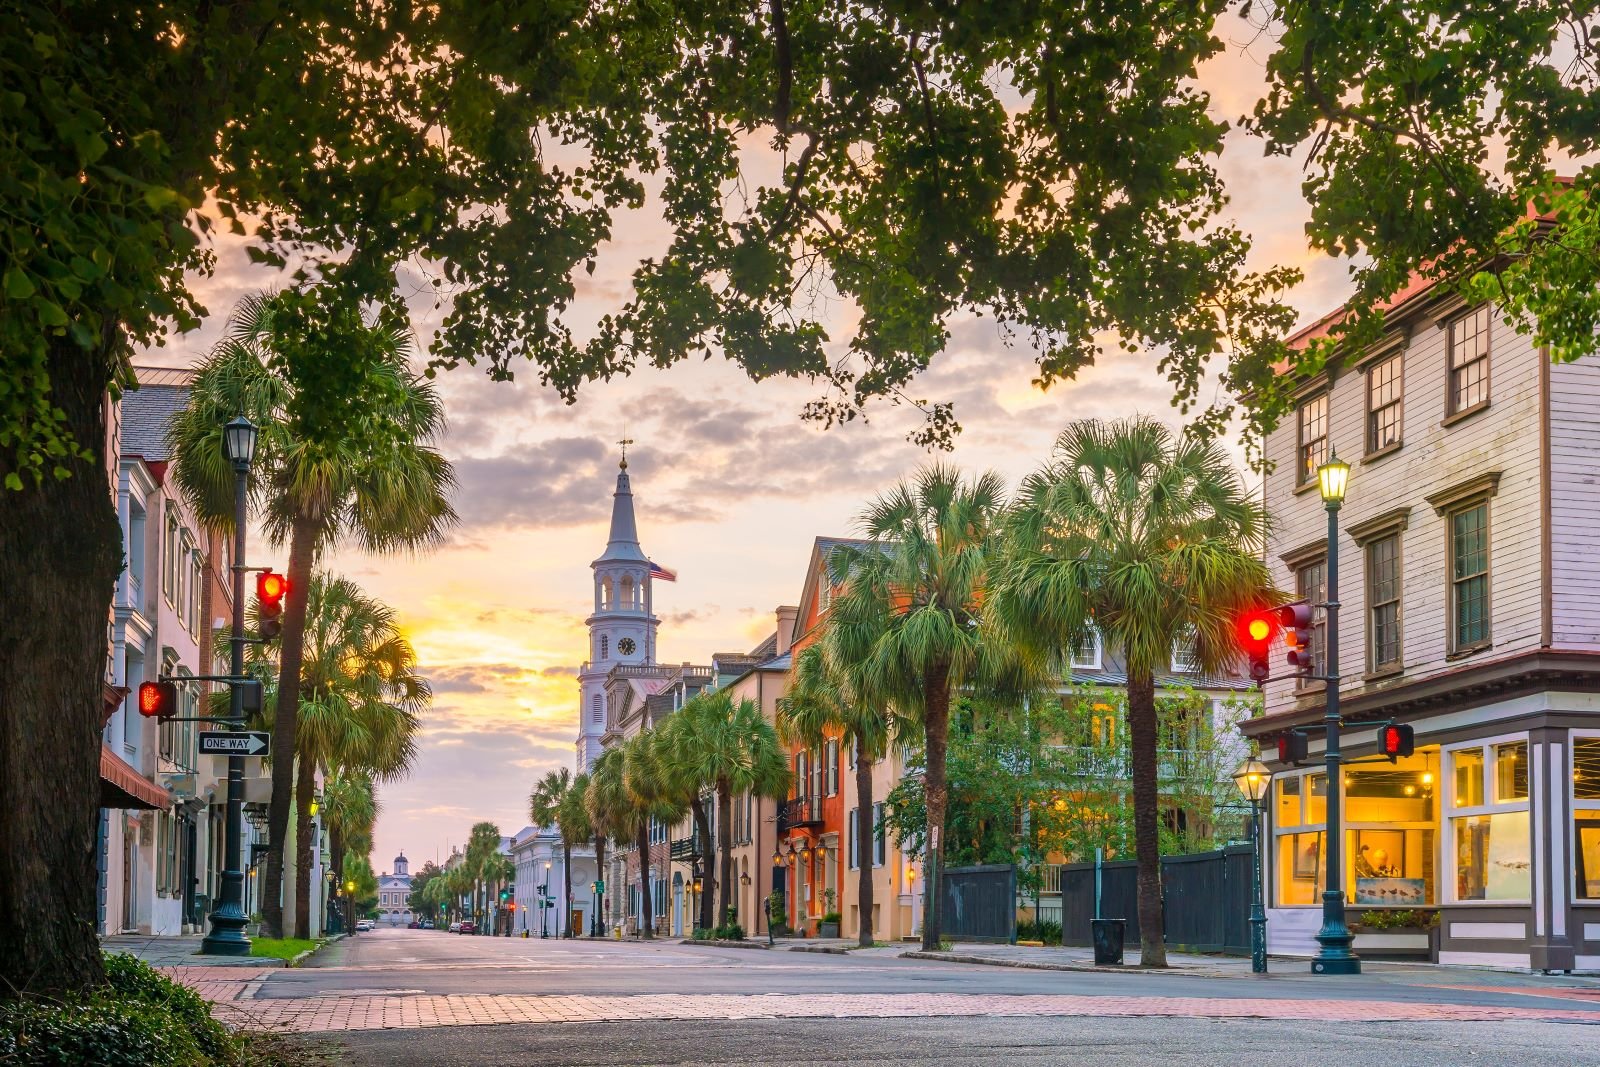 <p><span>The coastal city of Charleston is famous for its southern hospitality. It offers innumerable activities for a retired person to take part in. </span></p> <p><span>The underrated food options are a blessing for the ones who appreciate a good meal. The cost of living is lower than average, which adds to its charm. Most of the year is sunny and you have access to a sound healthcare system. Charleston should be your option if you want a secure and healthy life after your retirement.</span></p>